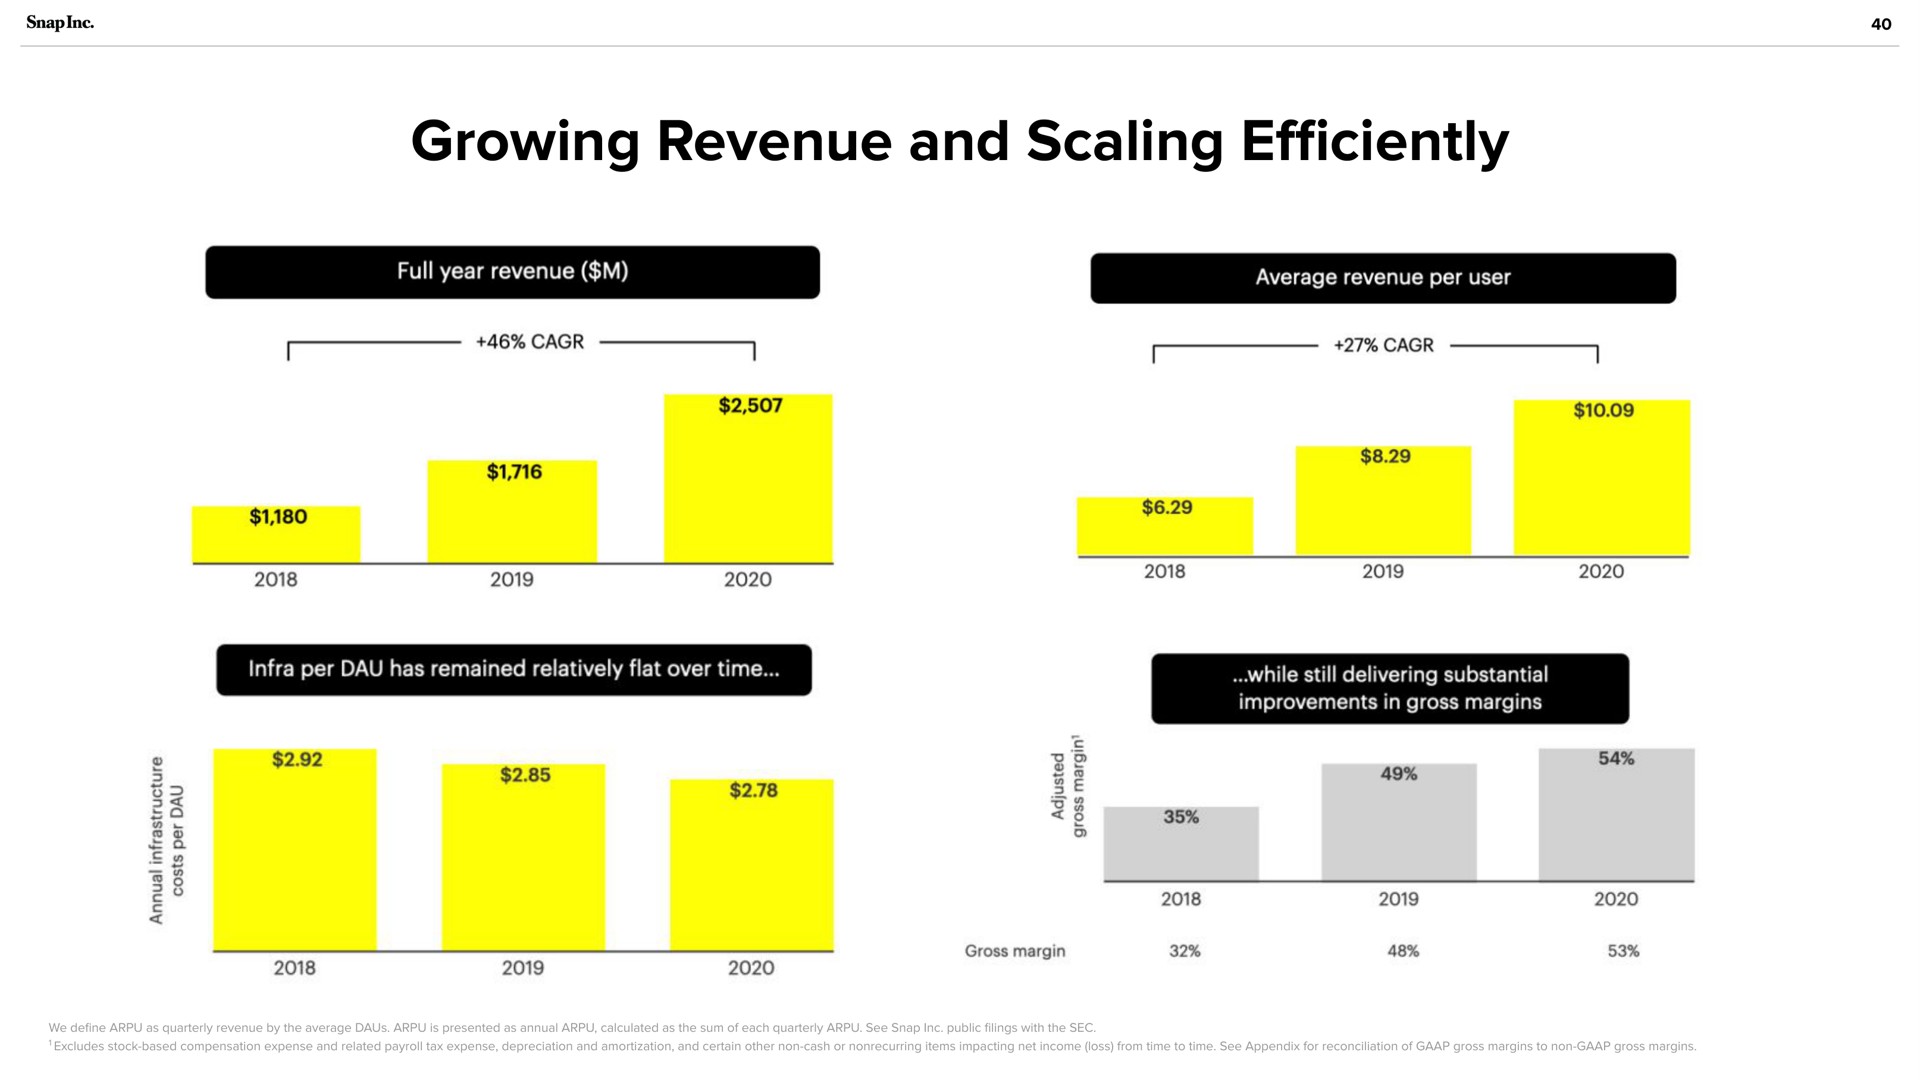 growing revenue and scaling efficiently | Snap Inc